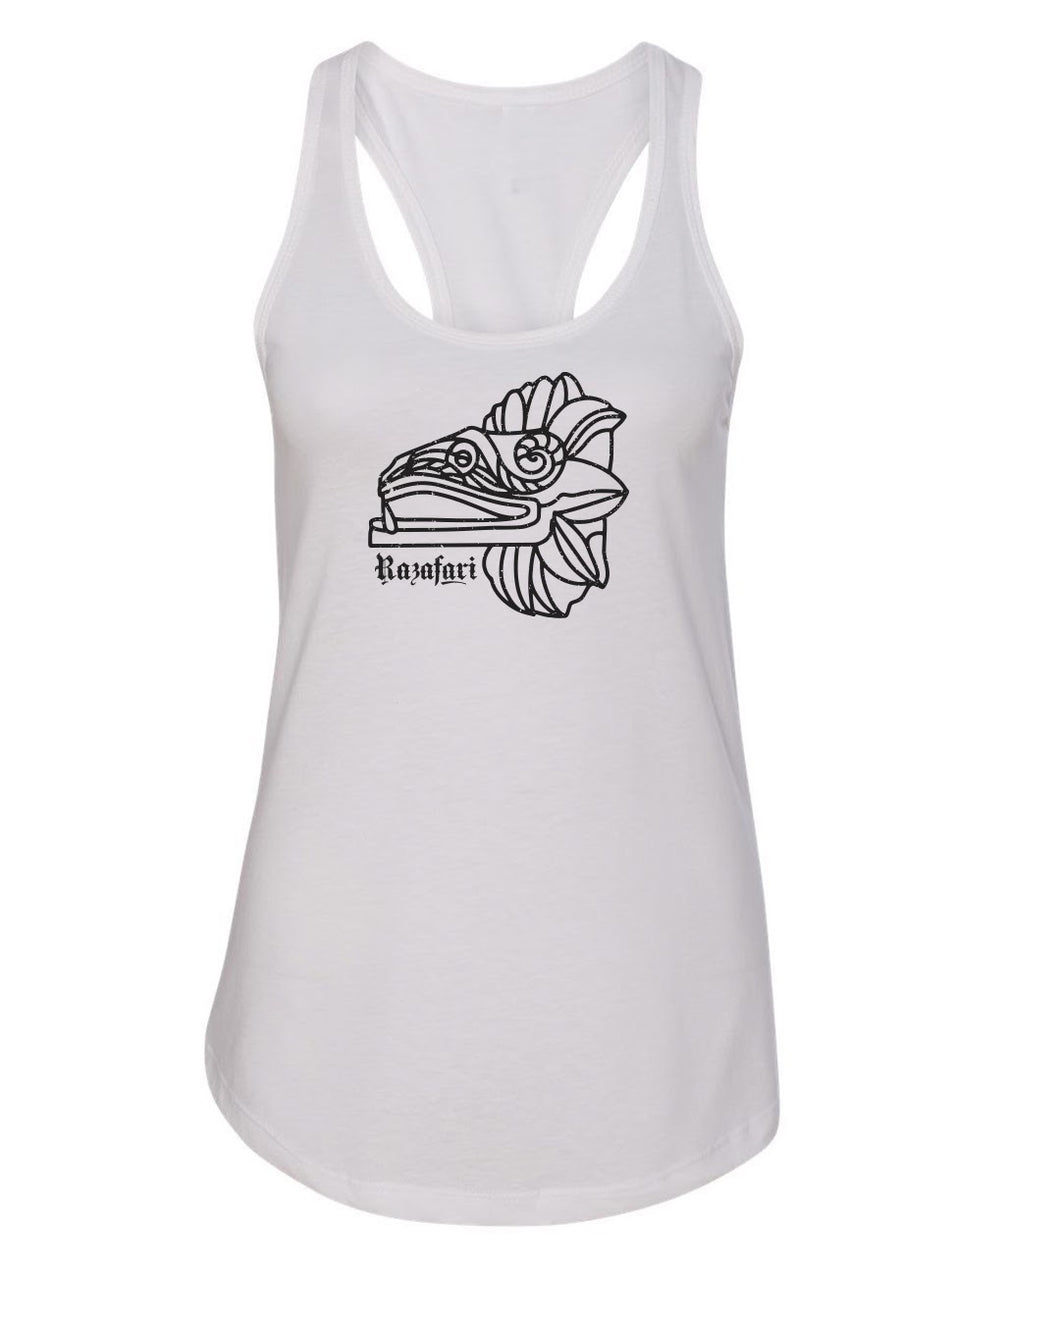 Feathered Serpent Ladies Tank - White